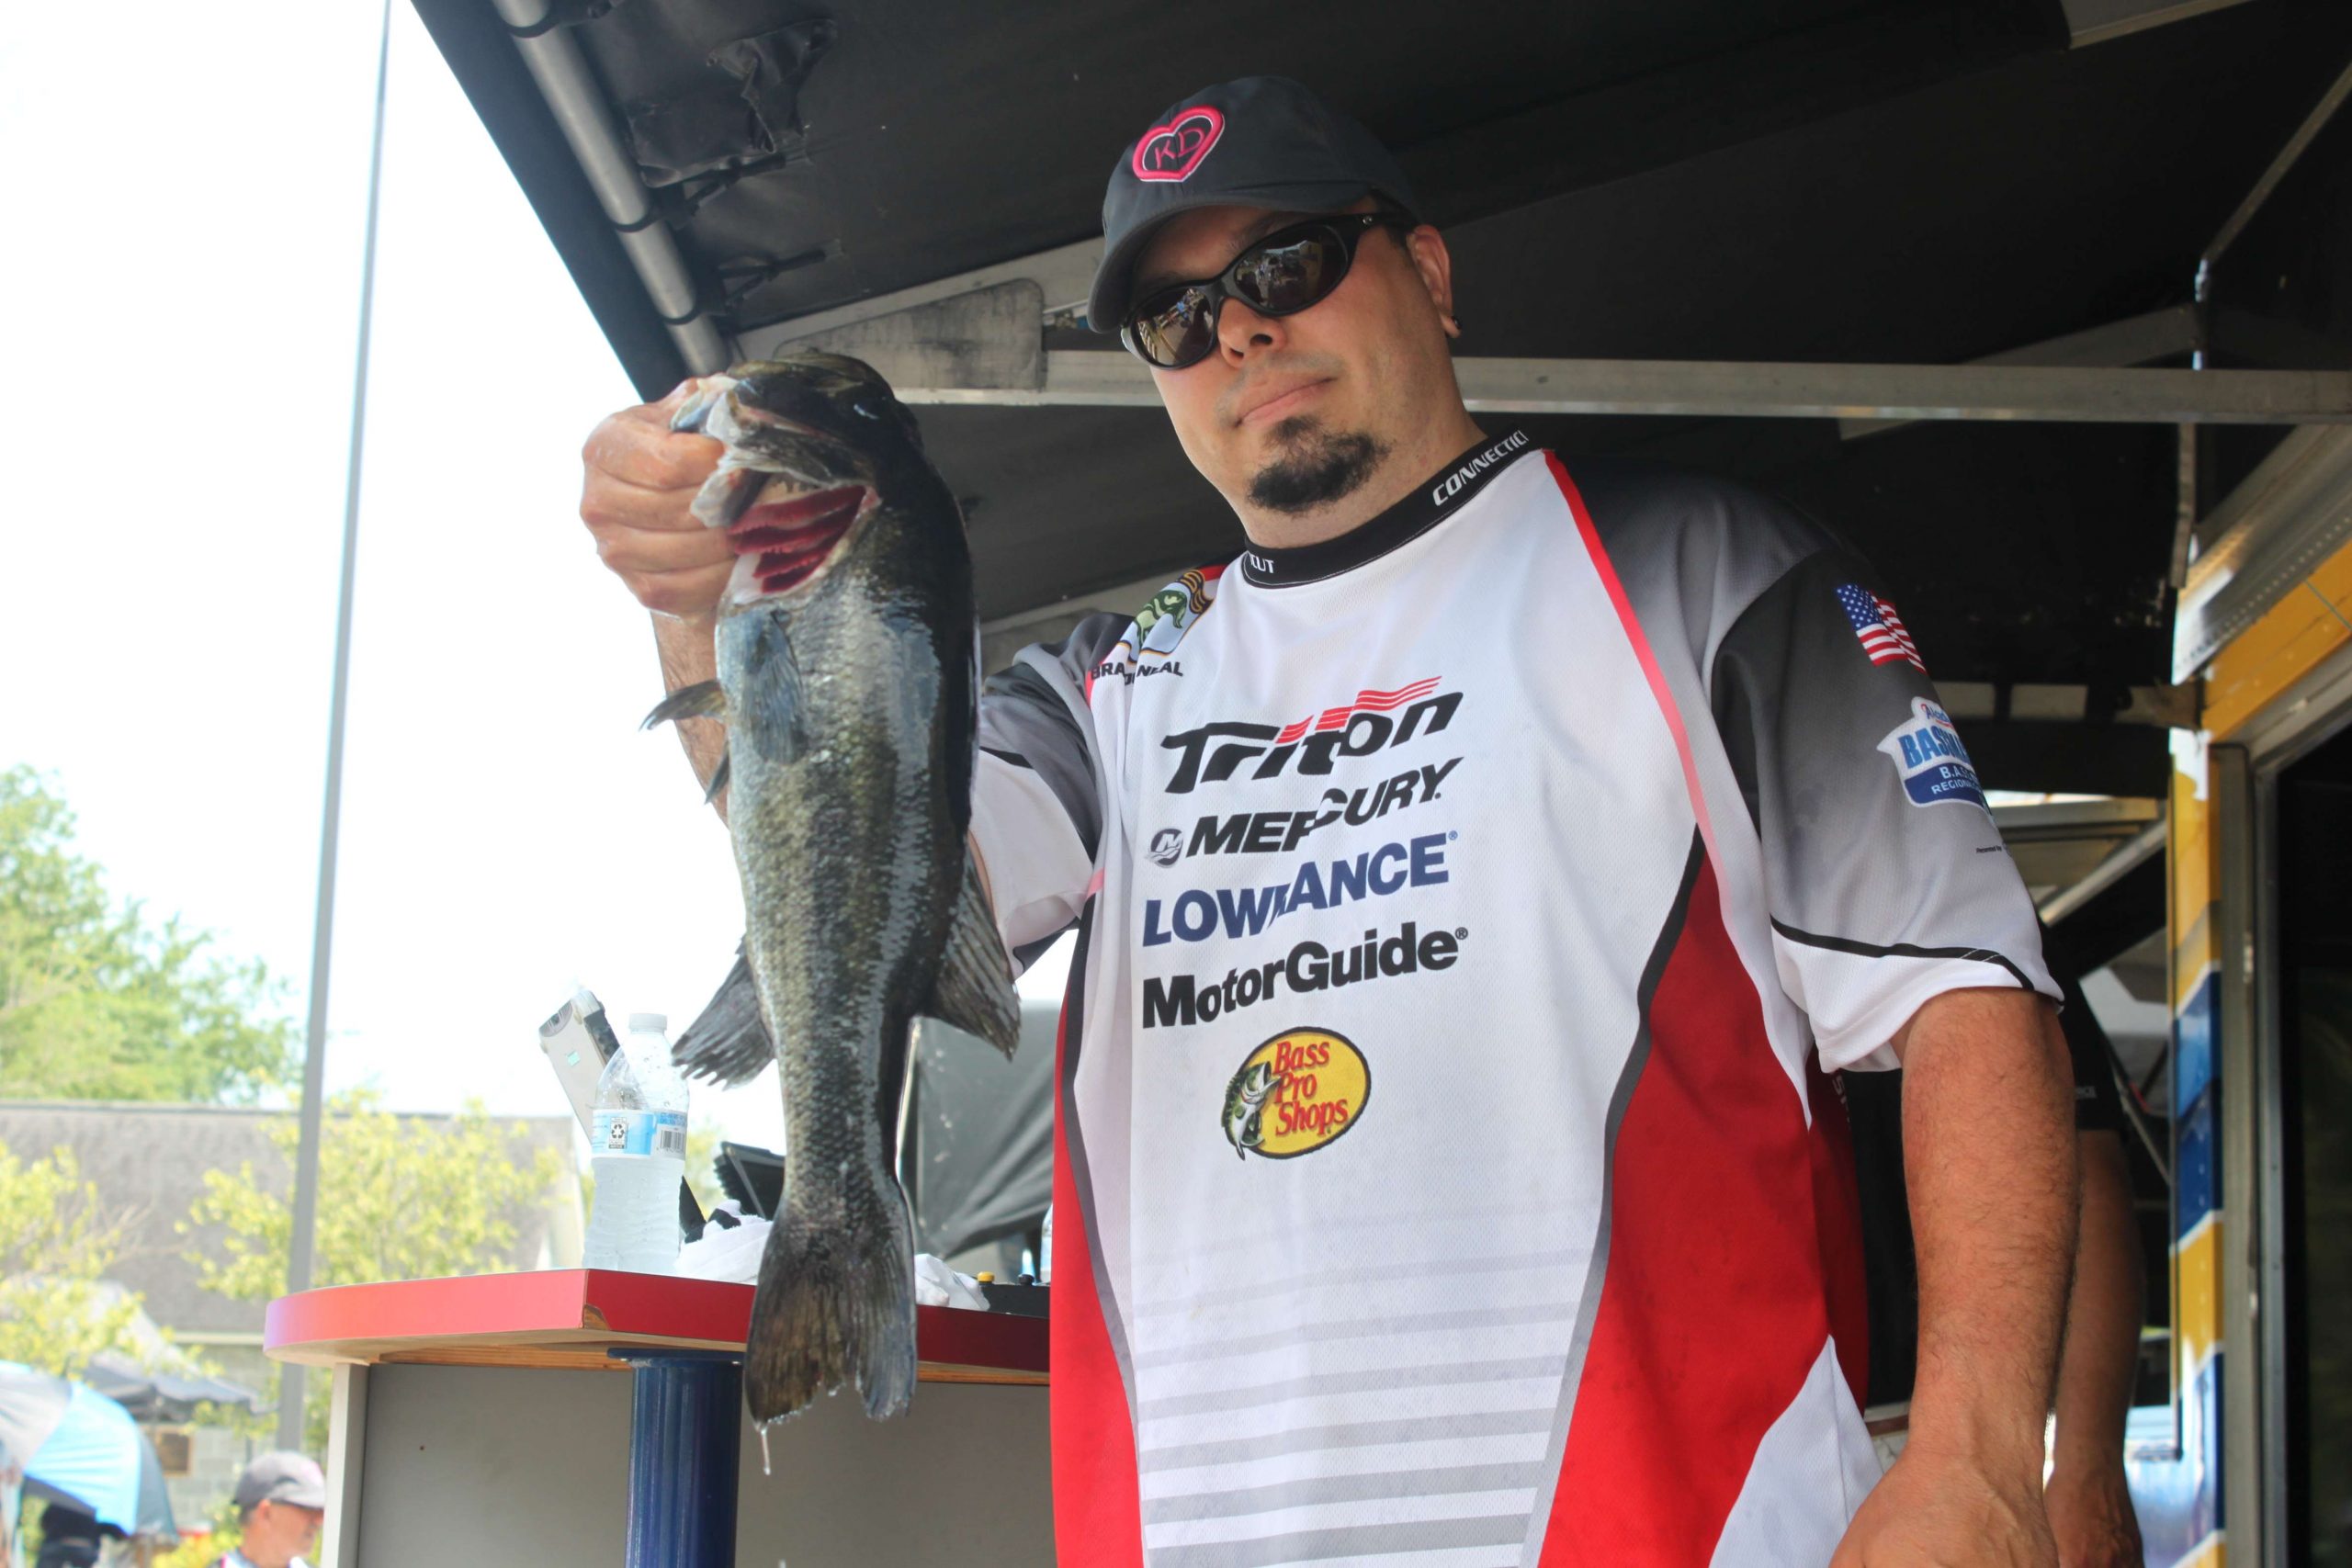 Brandon Neal of Connecticut said he covered about a 100-yard stretch of water on Wednesday to catch a limit that weighed 9-1. Thatâs good enough for a lucky 13th place among boaters.